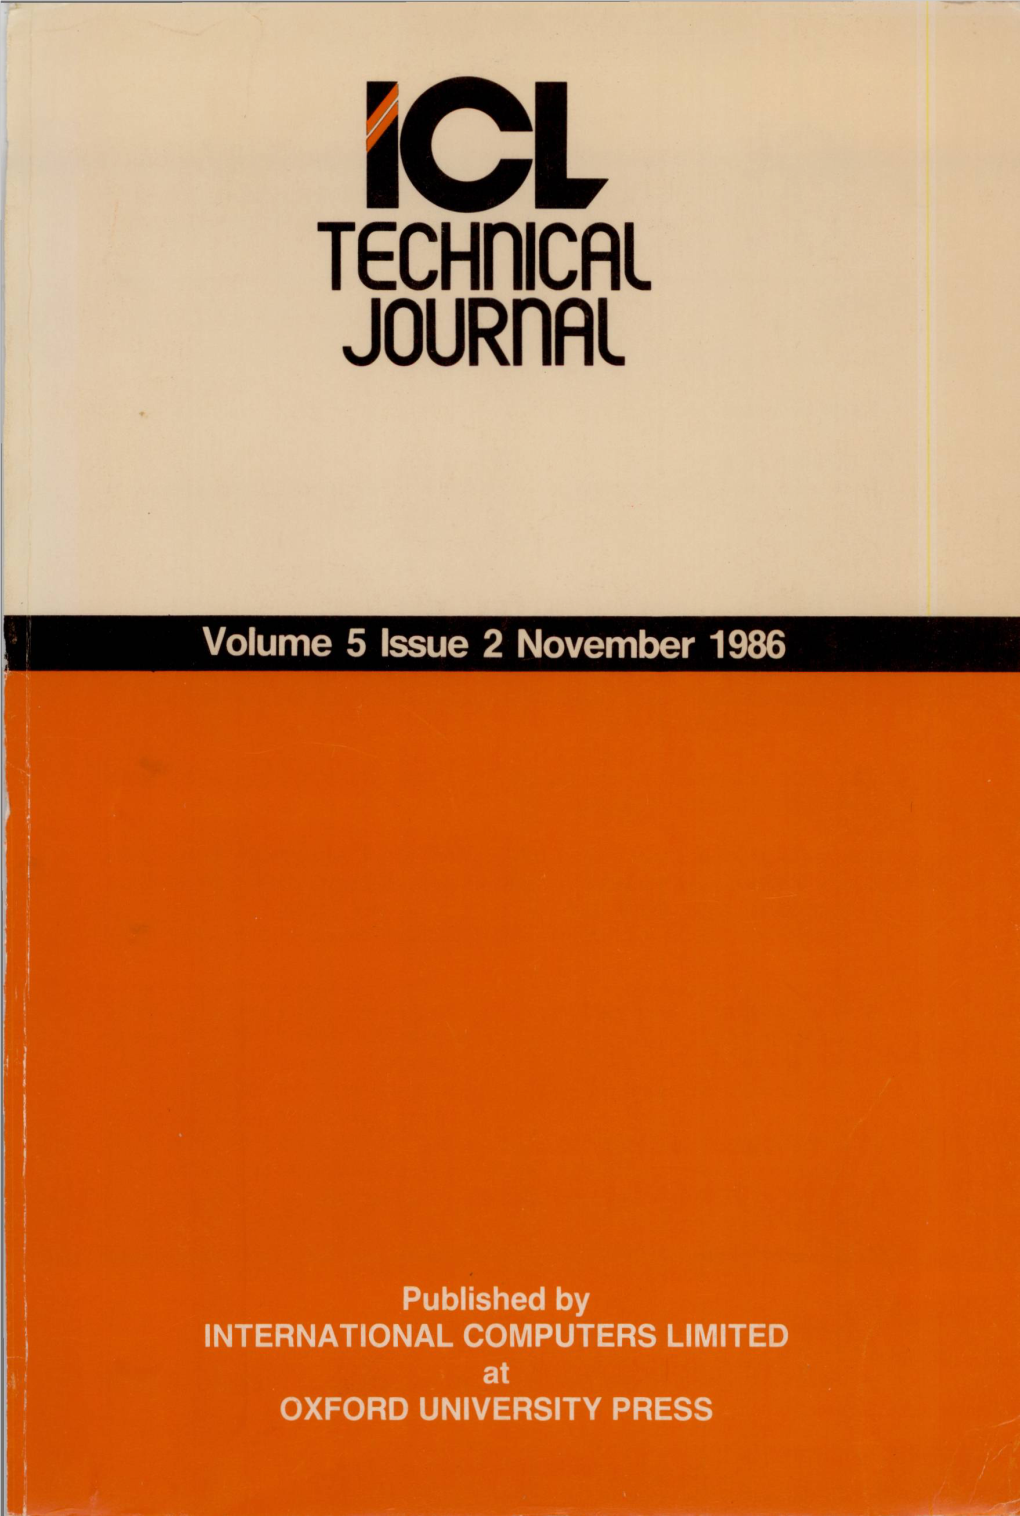 ICL Technical Journal Volume 5 Issue 2